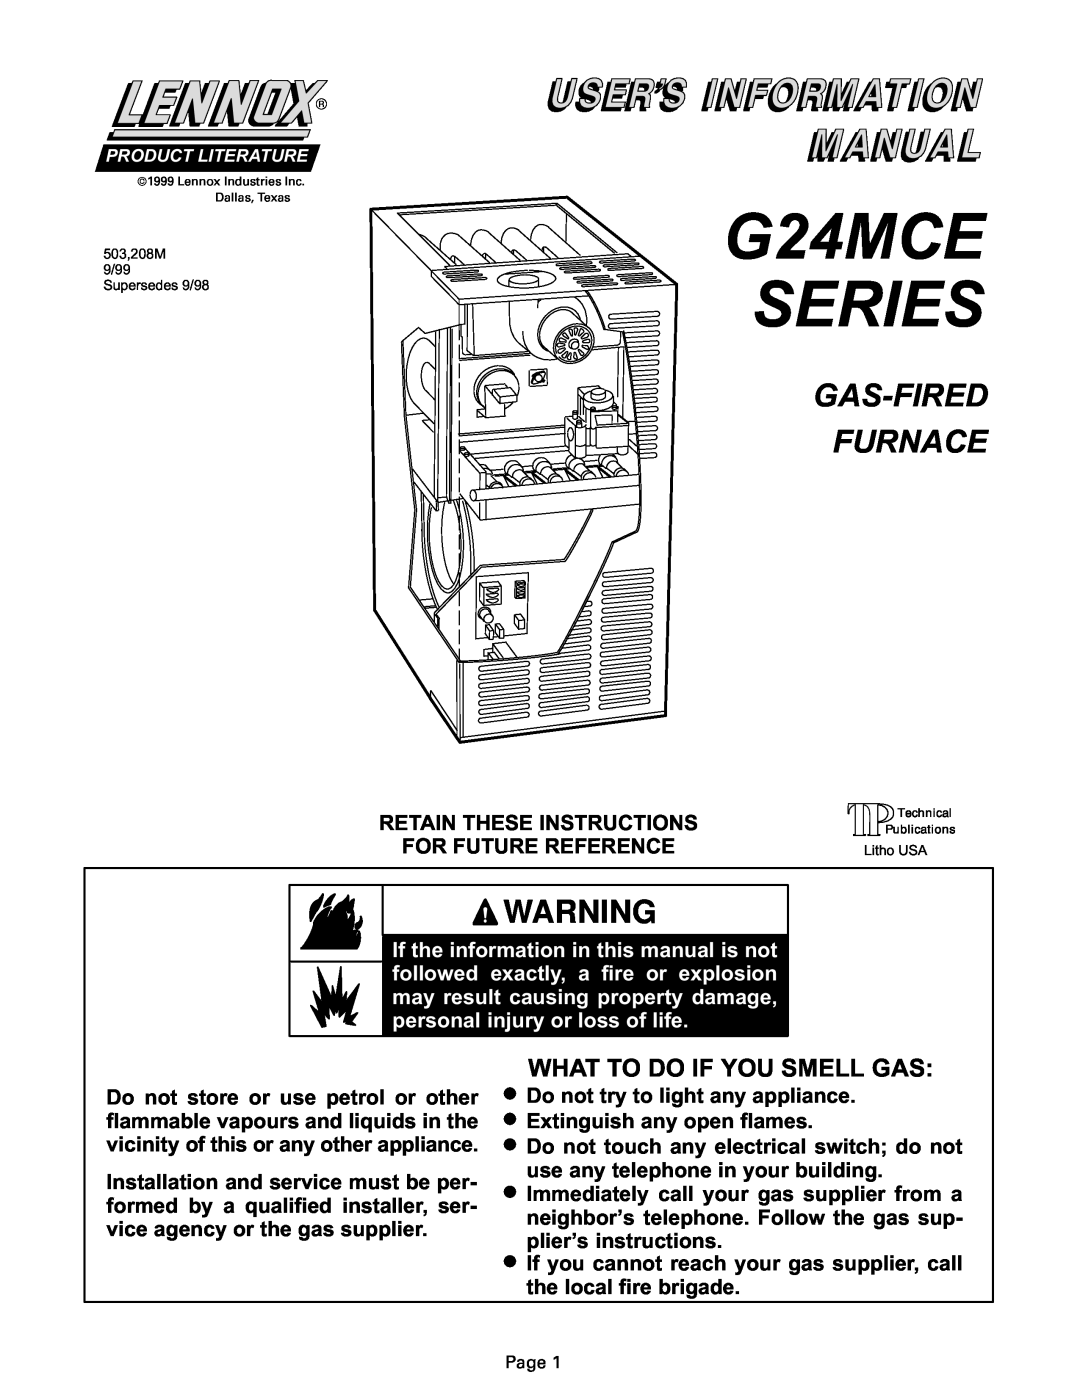 Lenoxx Electronics manual G24MCE SERIES, Gas-Fired Furnace, What To Do If You Smell Gas 